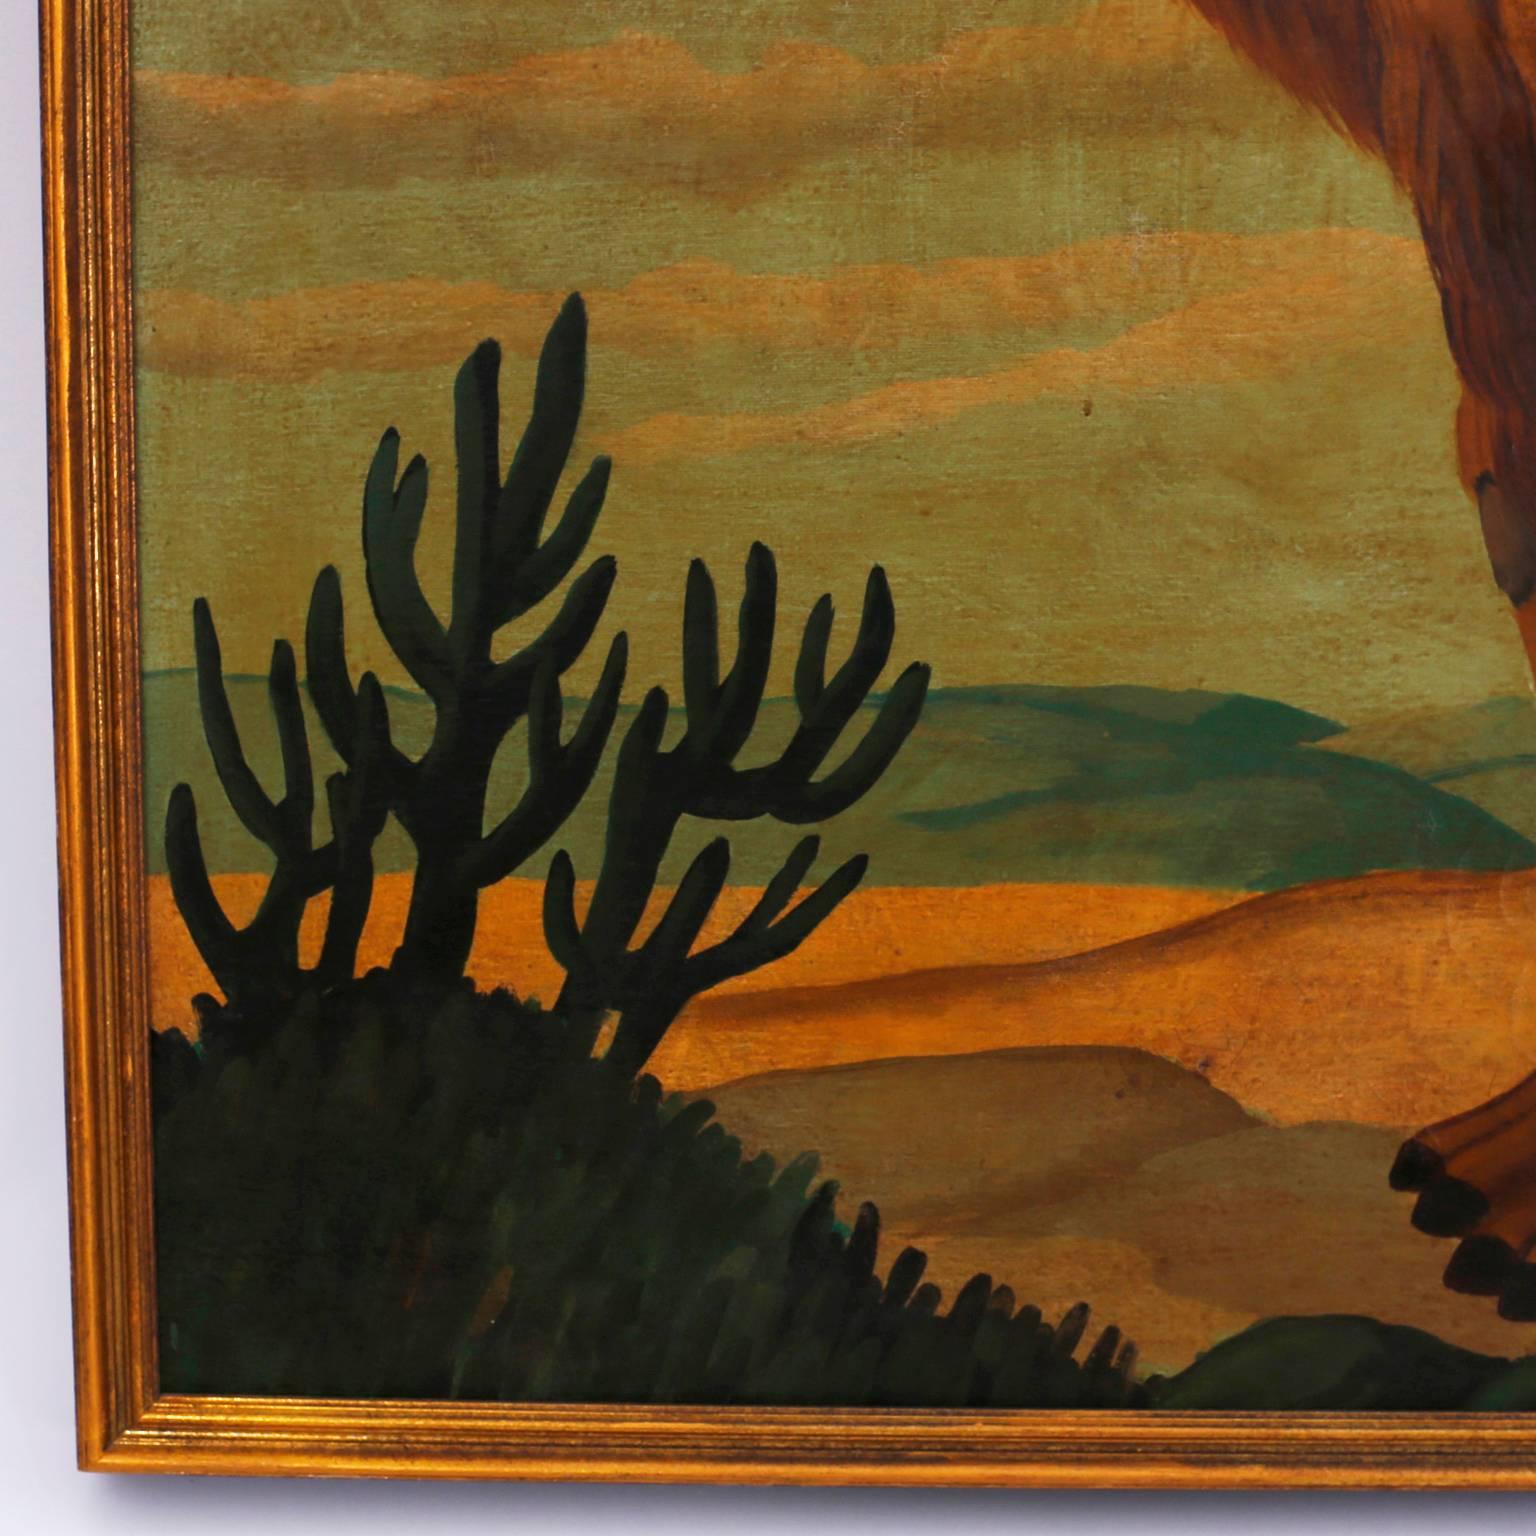 American Oil Painting on Canvas of a Camel by William Skilling